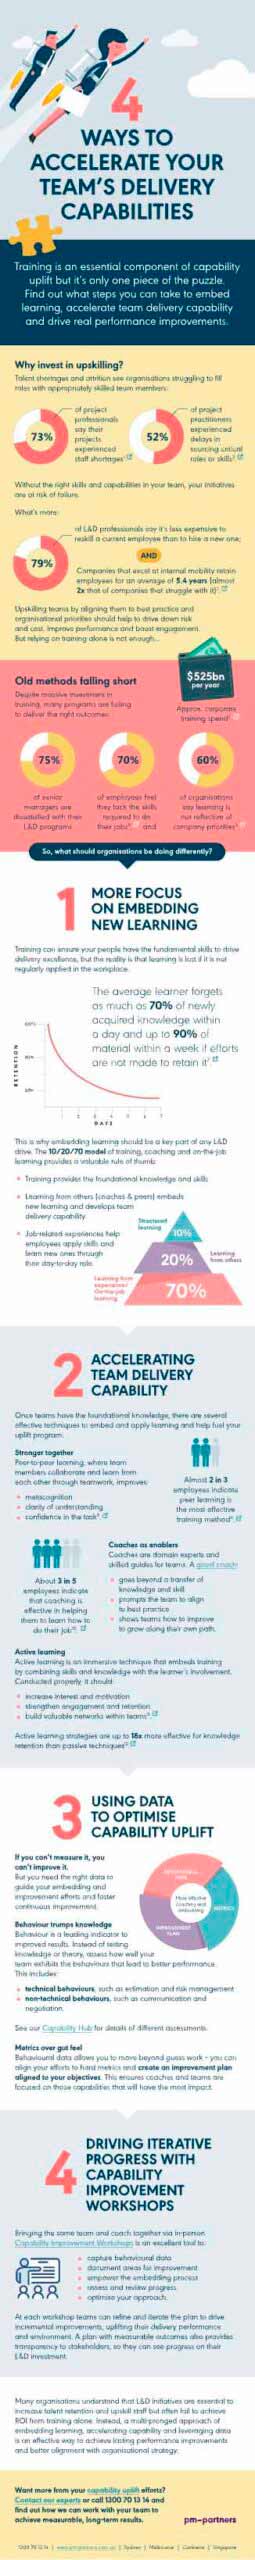 4 ways to accelerate your team's delivery capabilities infographic